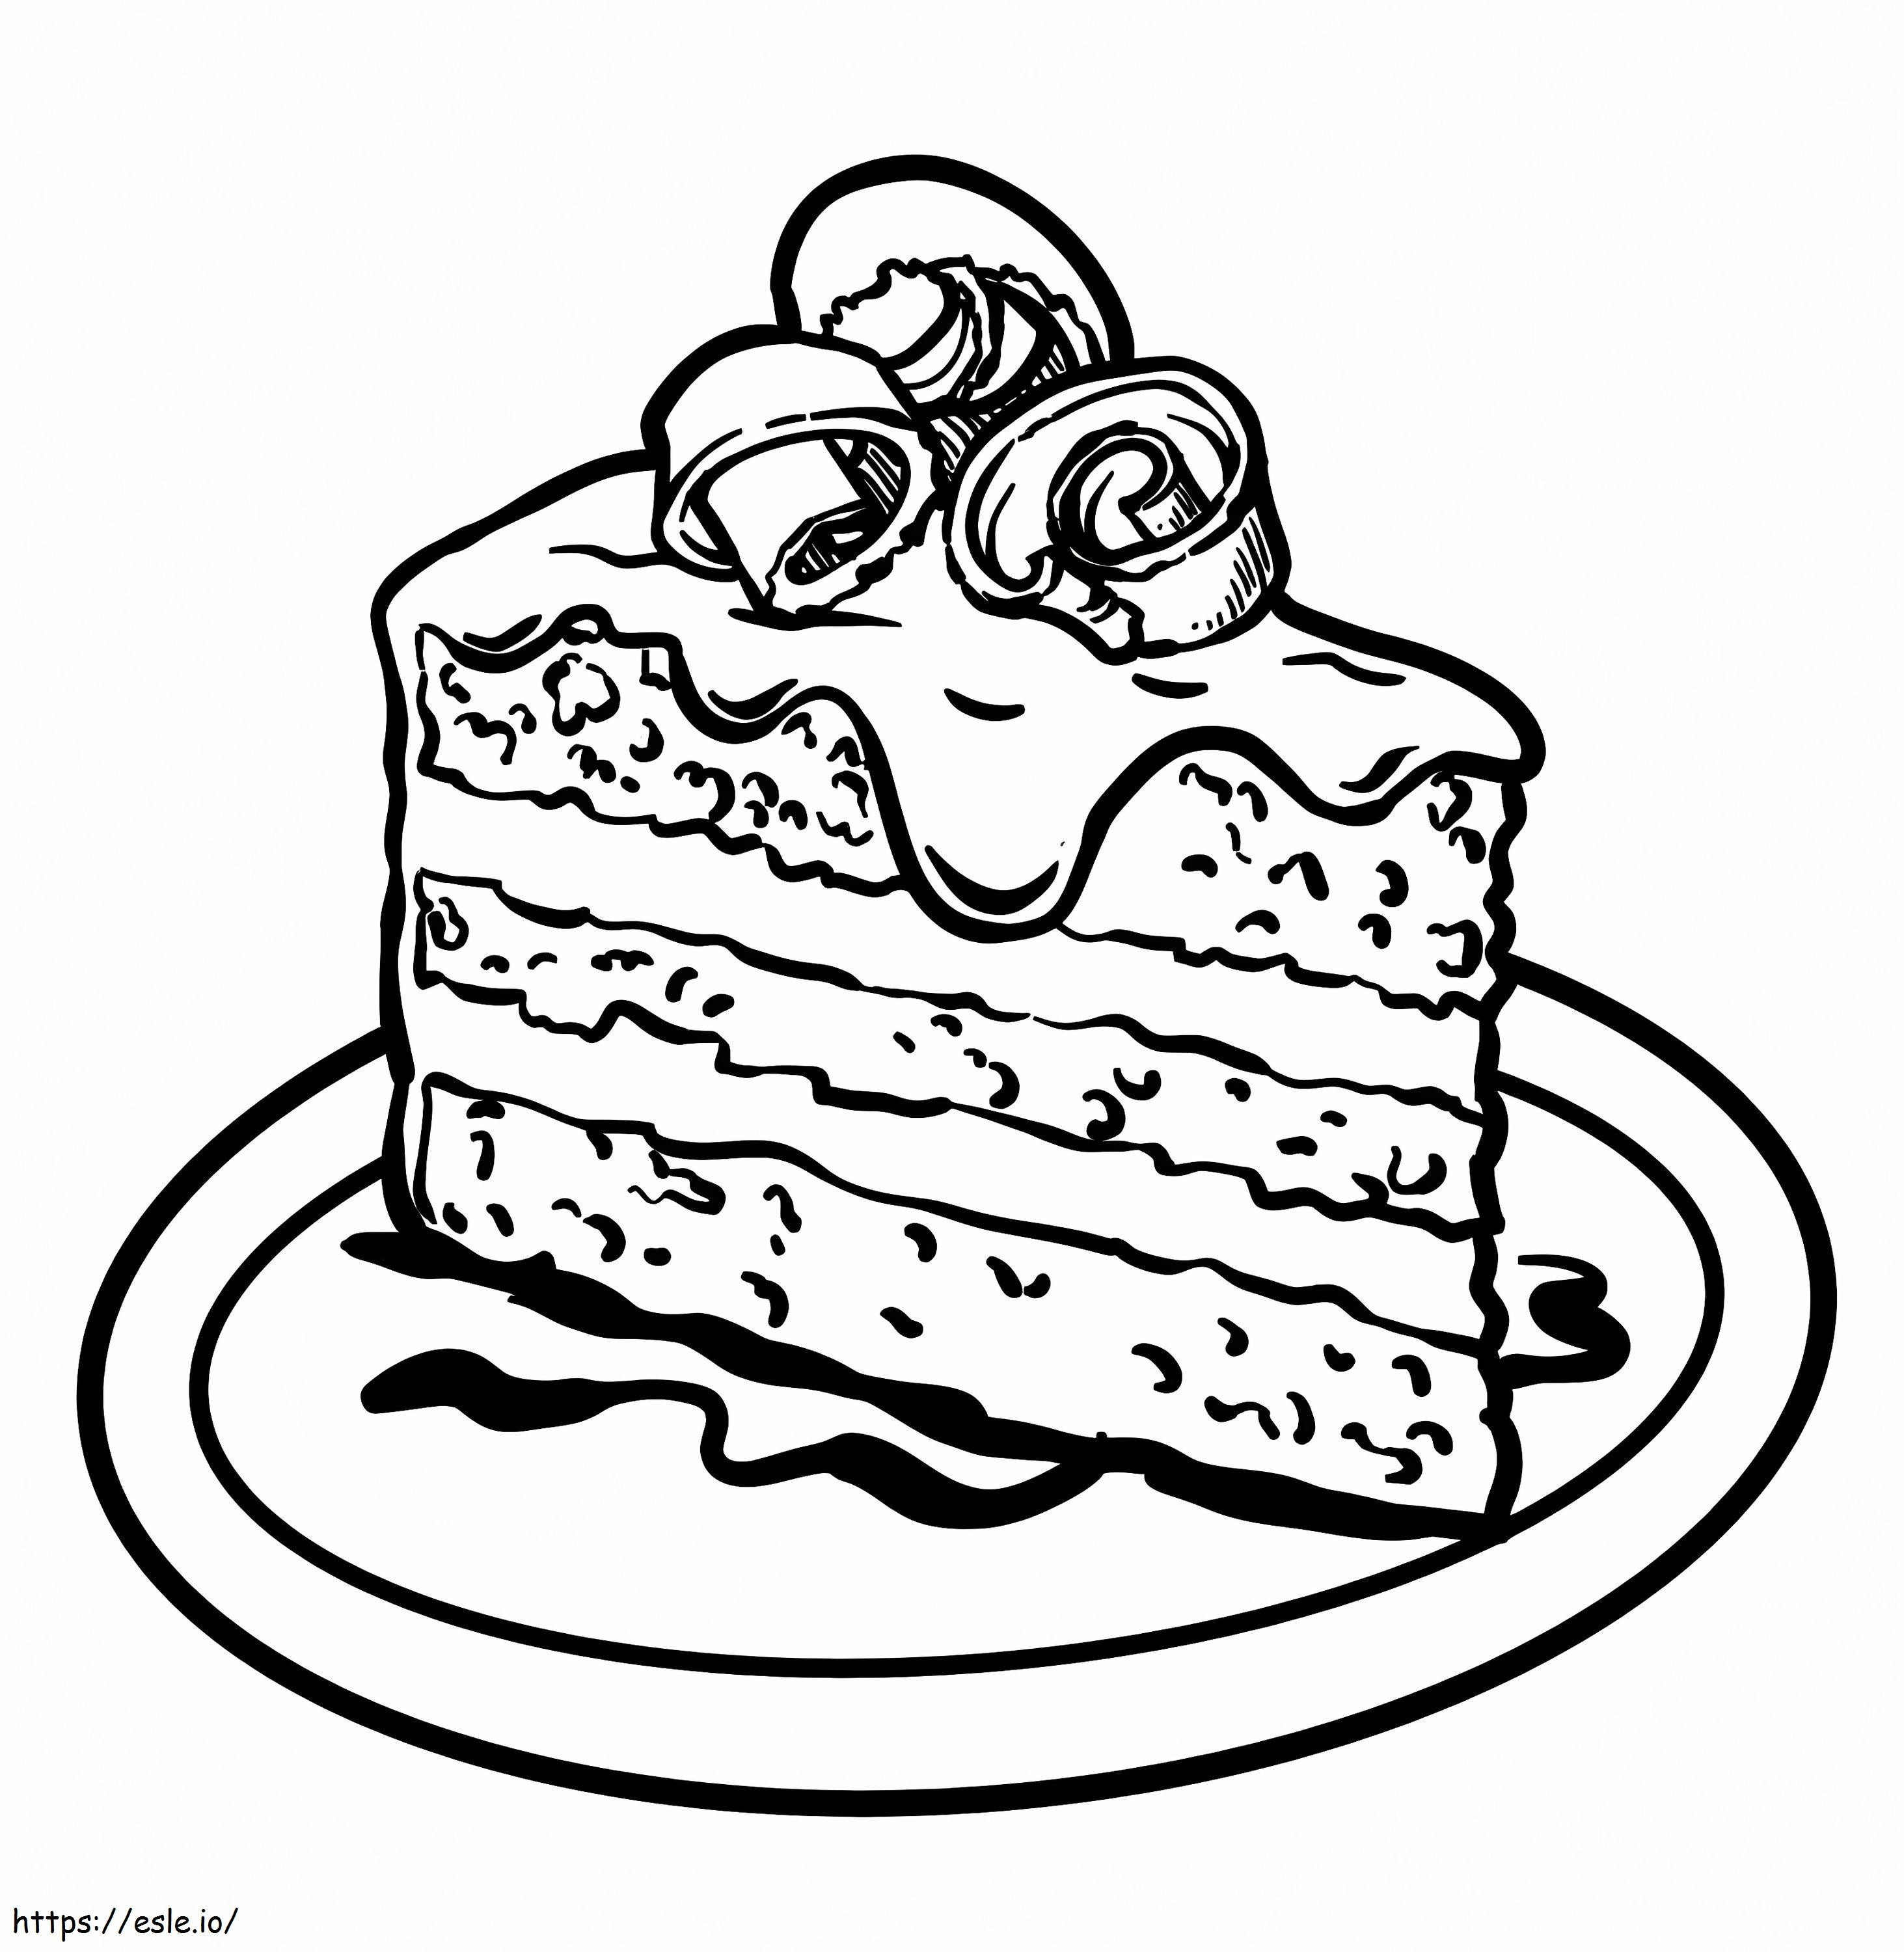 Piece Of Cake On Plate coloring page